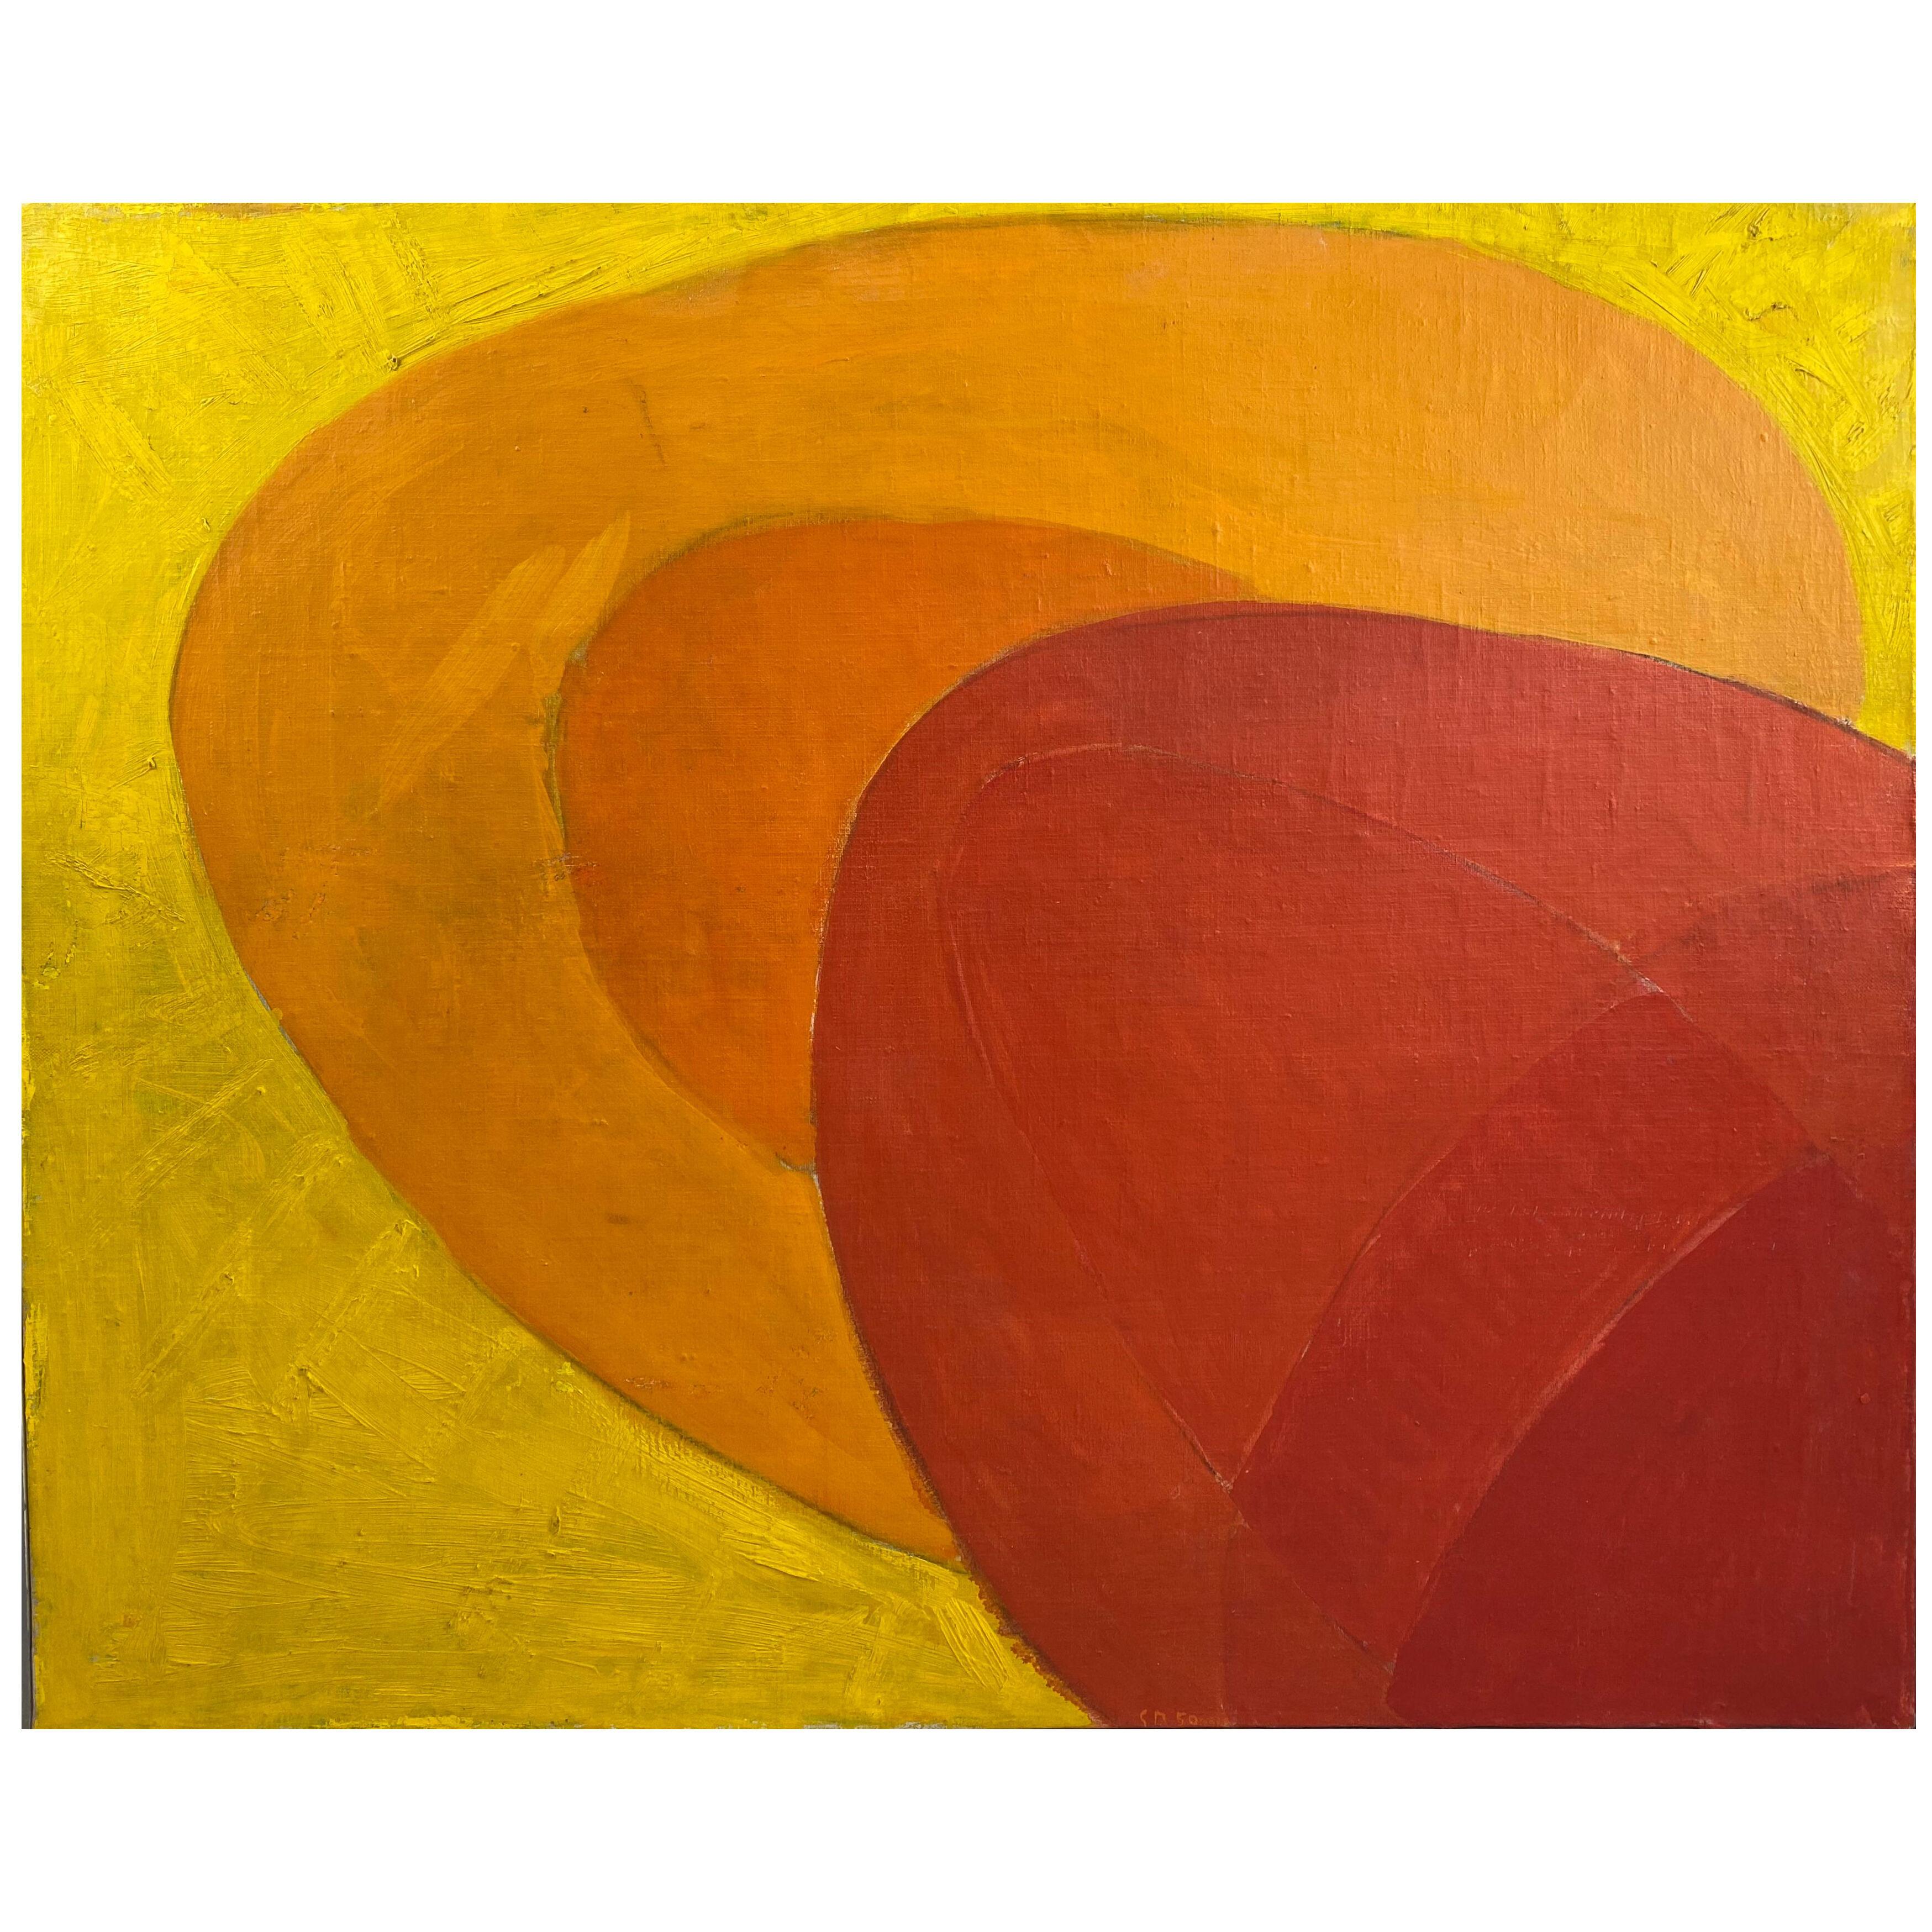 Painting. "Shapes against yellow". Gert Marcus (1914-2008)